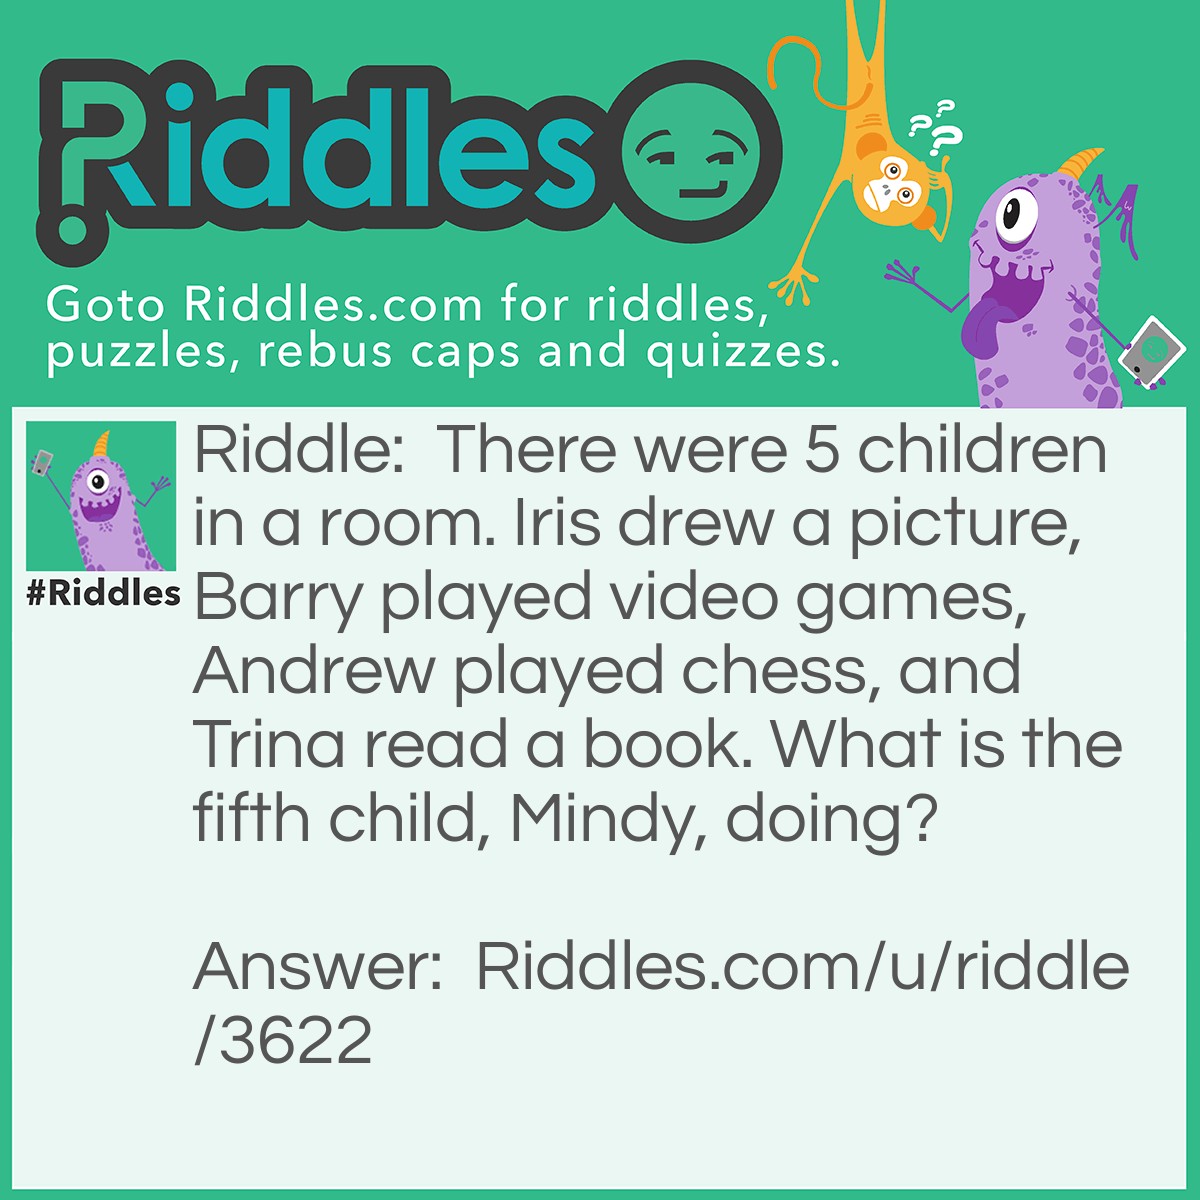 Riddle: There were 5 children in a room. Iris drew a picture, Barry played video games, Andrew played chess, and Trina read a book. What is the fifth child, Mindy, doing? Answer: Mindy is playing chess with Andrew. You can't play chess alone!